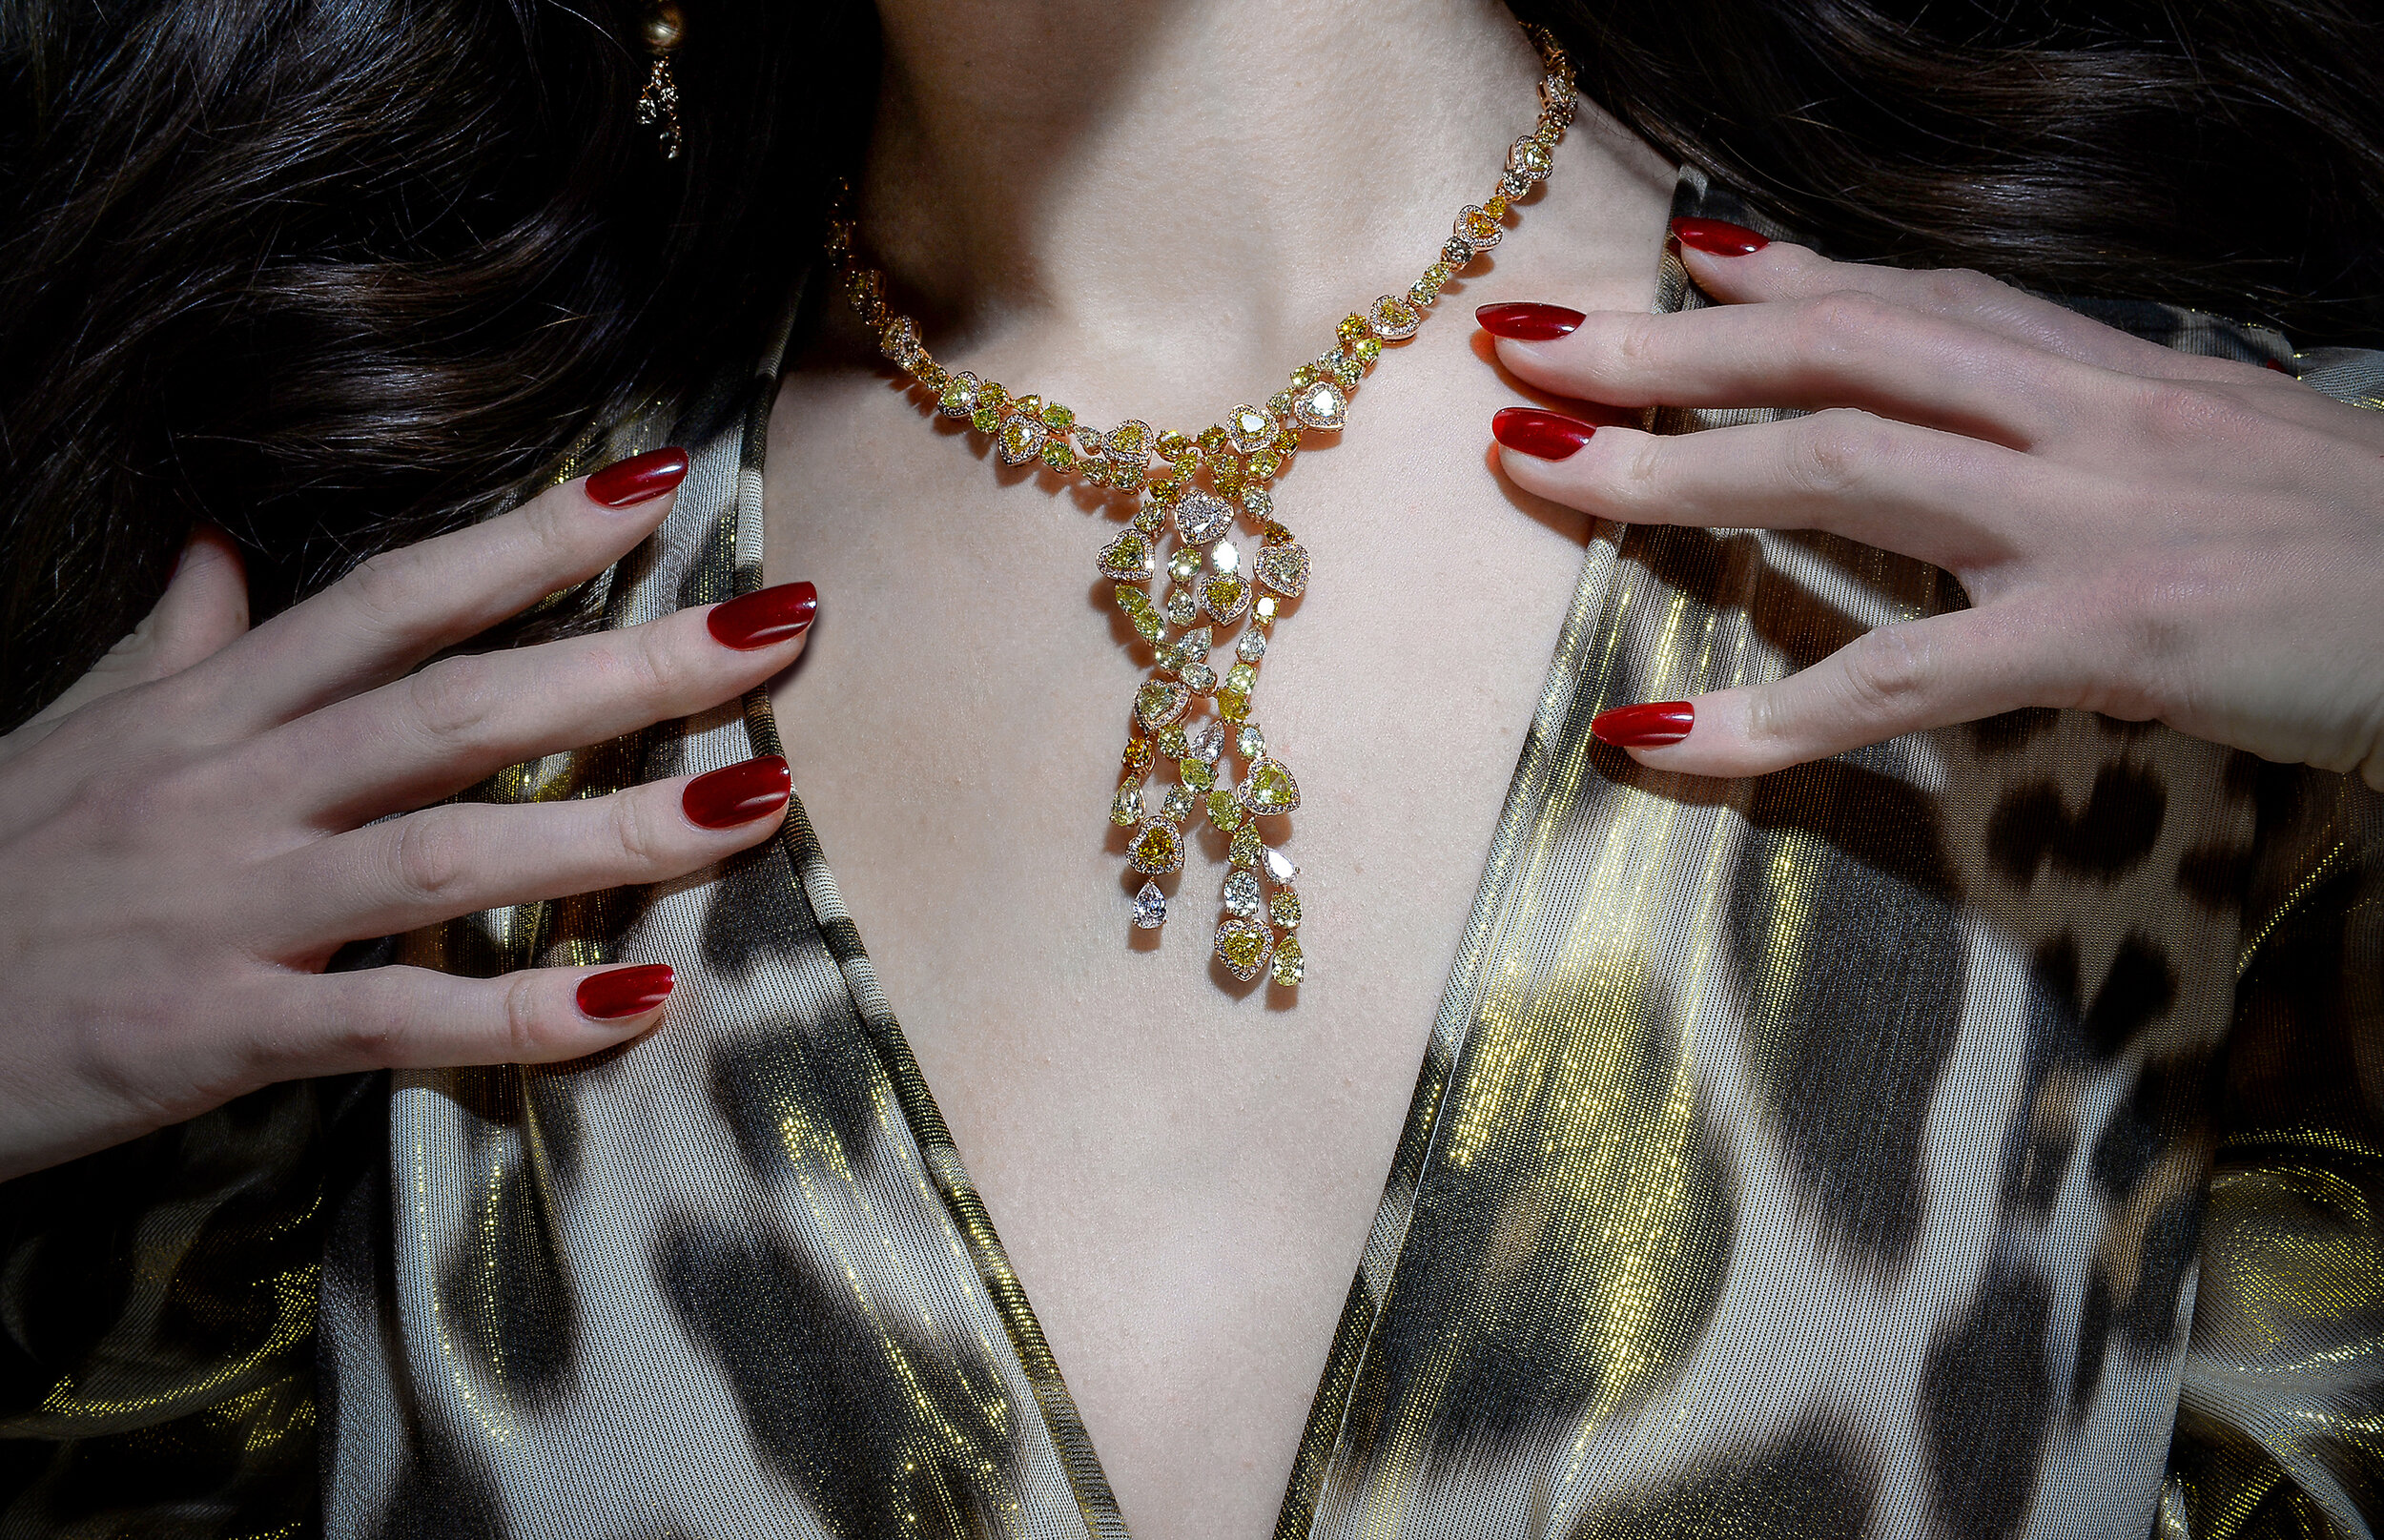 Chopard Canary Diamond Necklace - photo by Andrew Werner.jpg